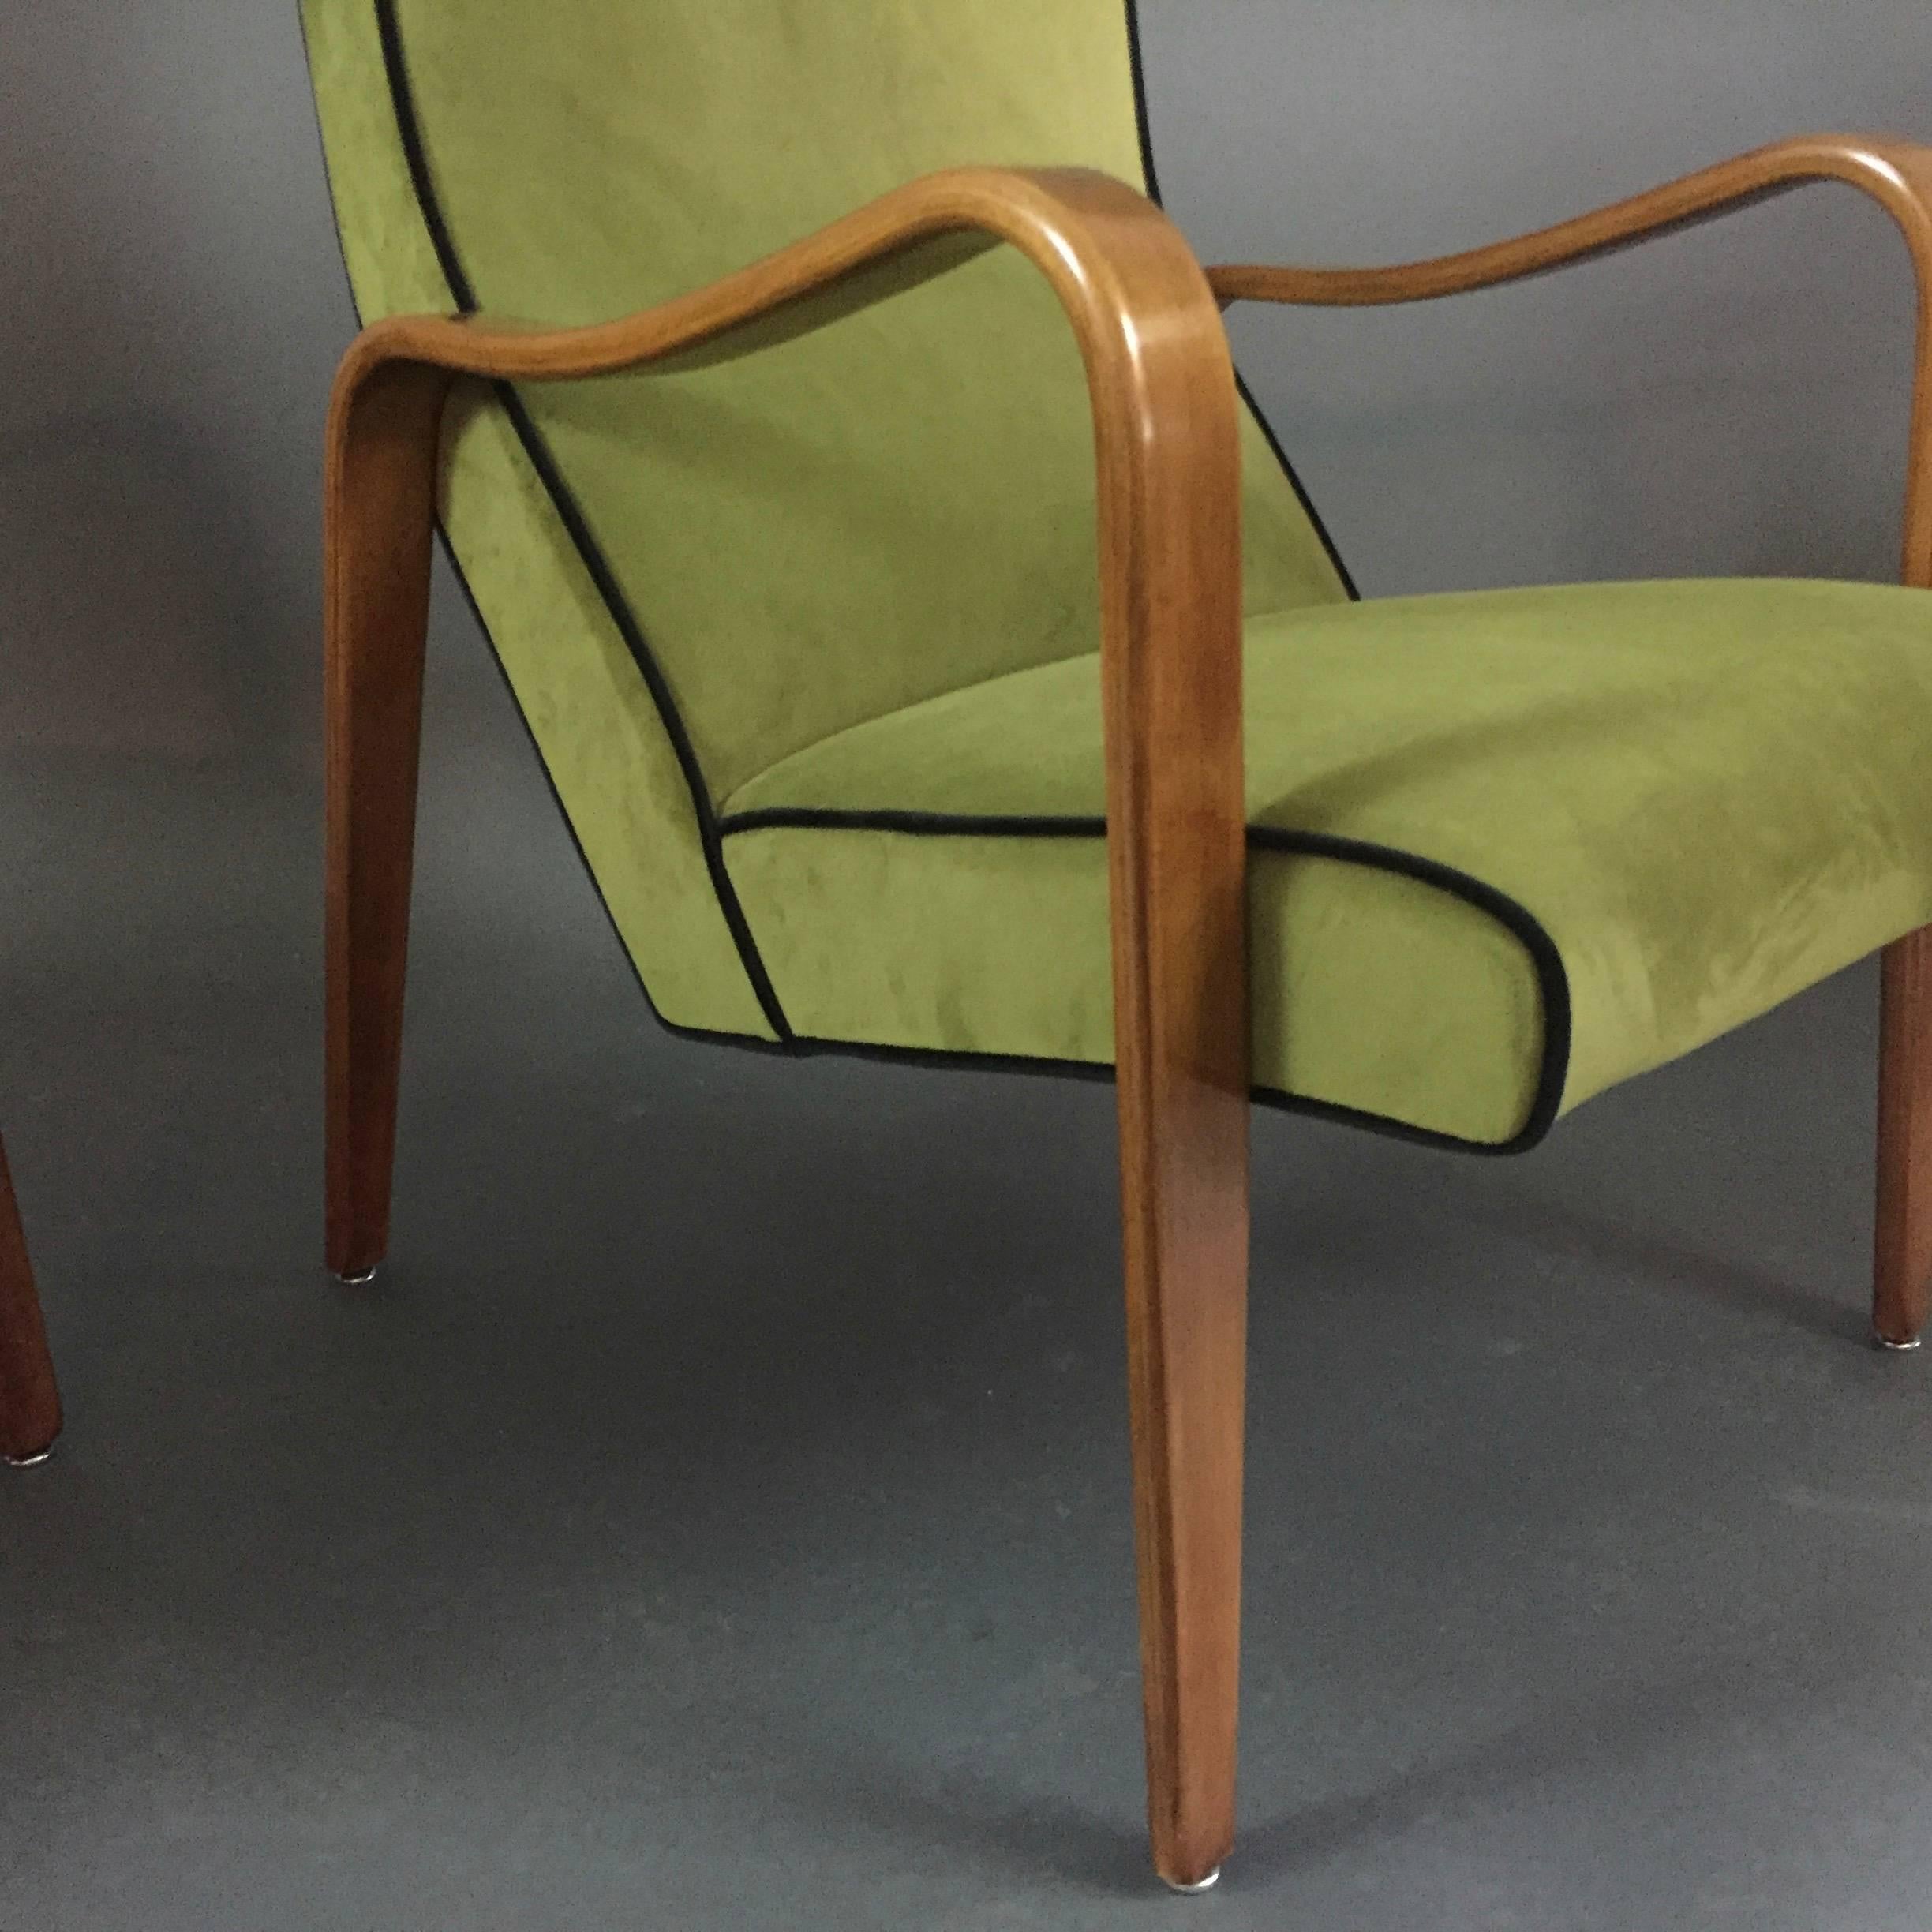 This is one of the coolest lounge chairs that came out of the Thonet USA studios in the 1950s fully in the laminated beech bentwood tradition with beautifully curved arms. This pair recently refinished and upholstered in green velvet with black